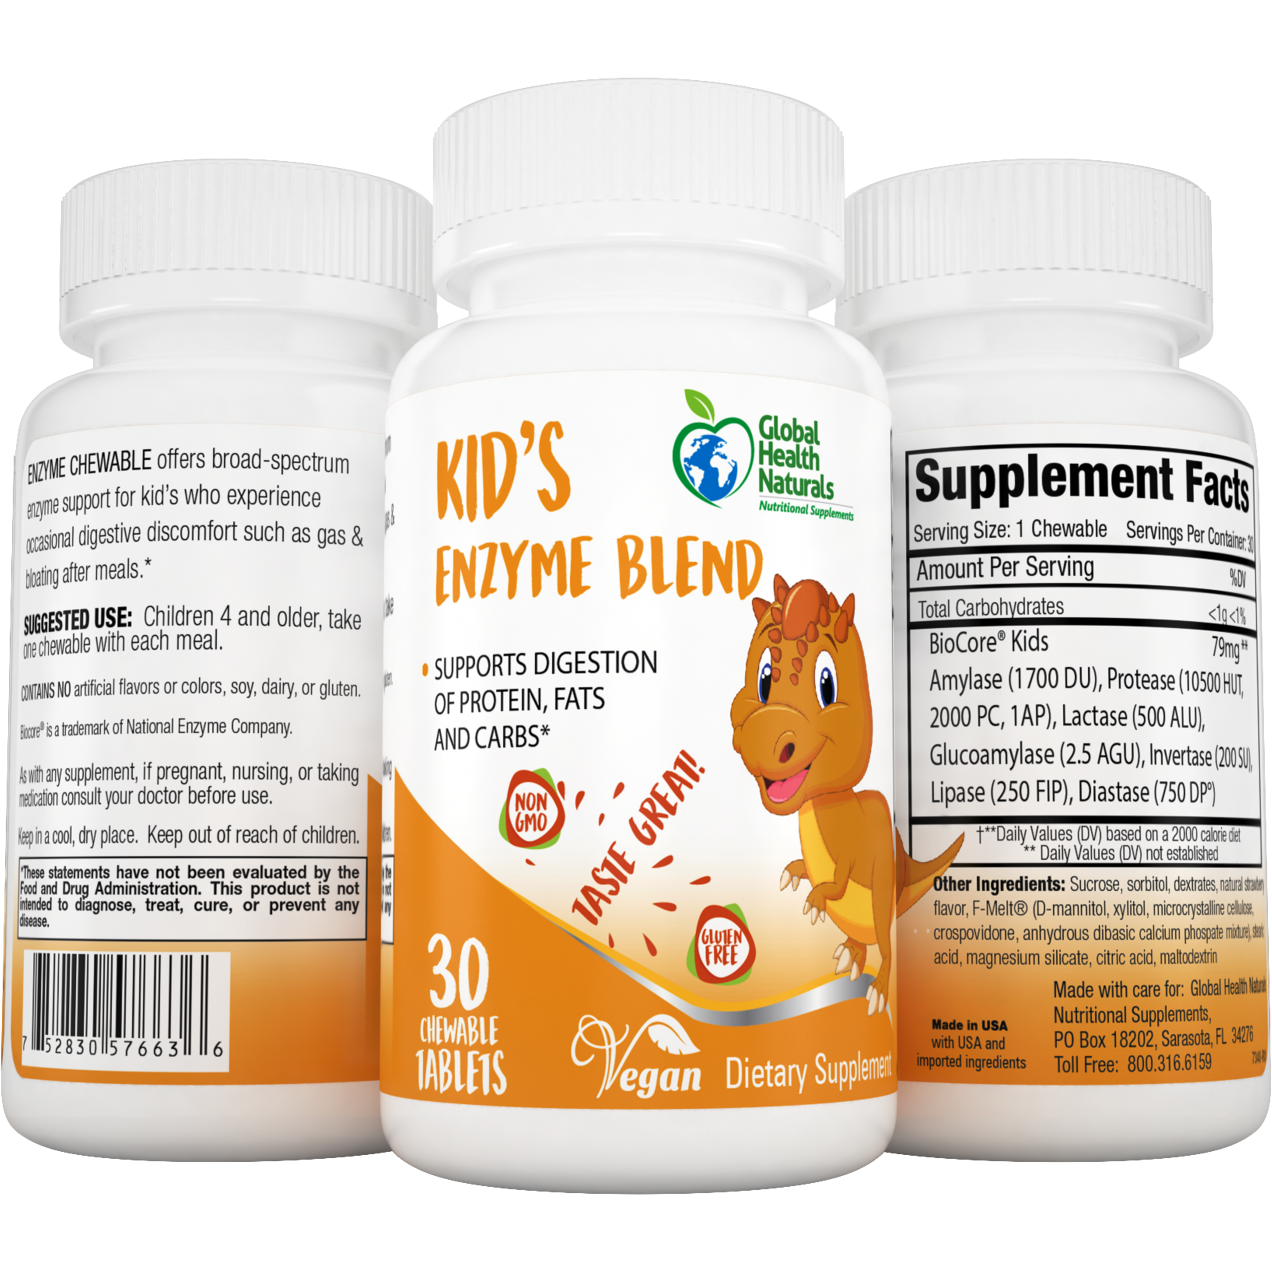 Global Health Naturals Kid's Enzyme Blend 30 ct | Little Baby.